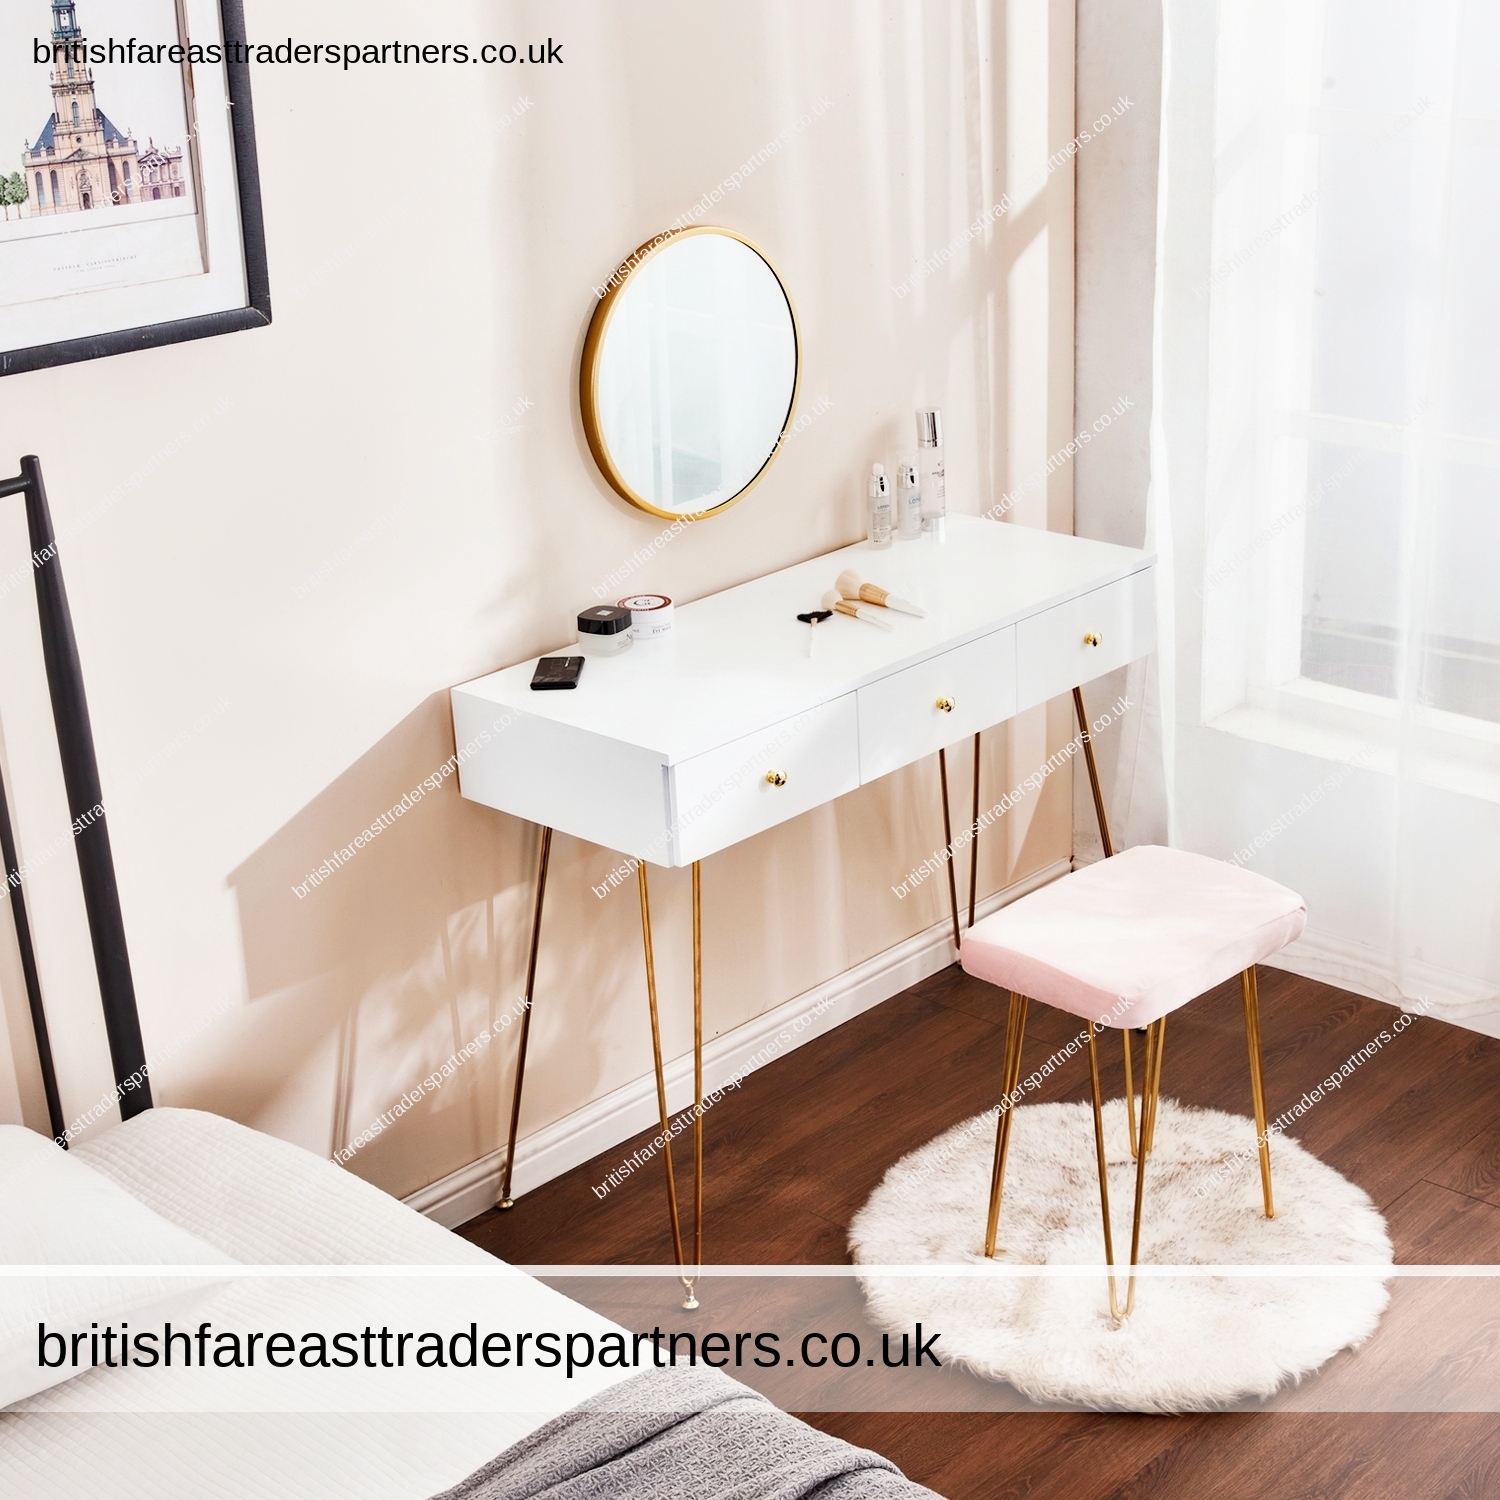 CHIC & STYLISH WHITE DRESSING TABLE BEDROOM VANITY TABLE CHAIR SET WITH CUSHIONED STOOL WALL MOUNT MIRROR 3 DRAWERS GOLD HAIRPIN LEGS MAKEUP TABLE LIVING ROOM | BEDROOM | FURNITURES | HOME | LIFESTYLE